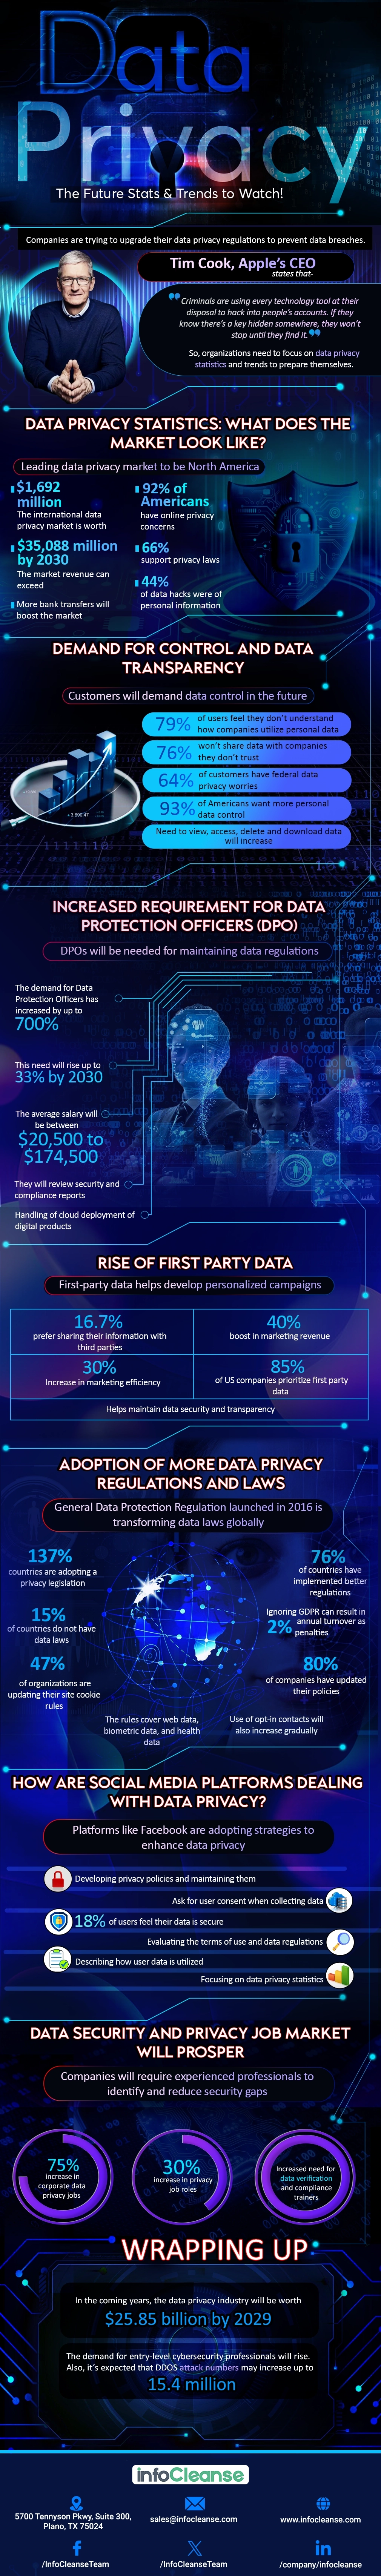 Data Privacy: The Future Stats and Trends to watch